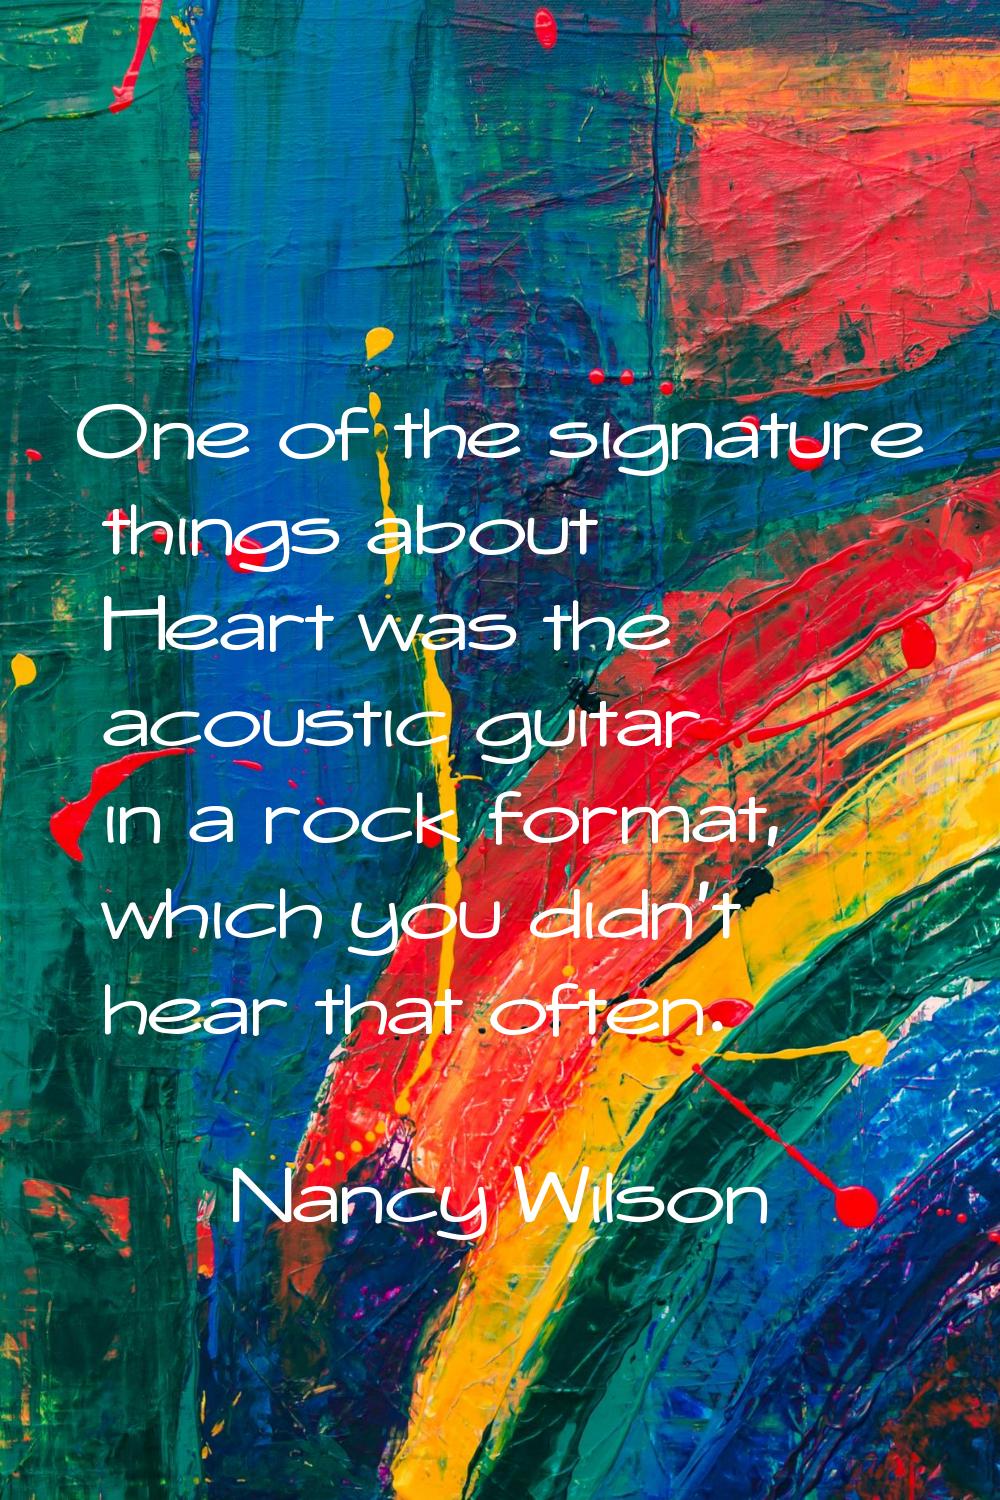 One of the signature things about Heart was the acoustic guitar in a rock format, which you didn't 